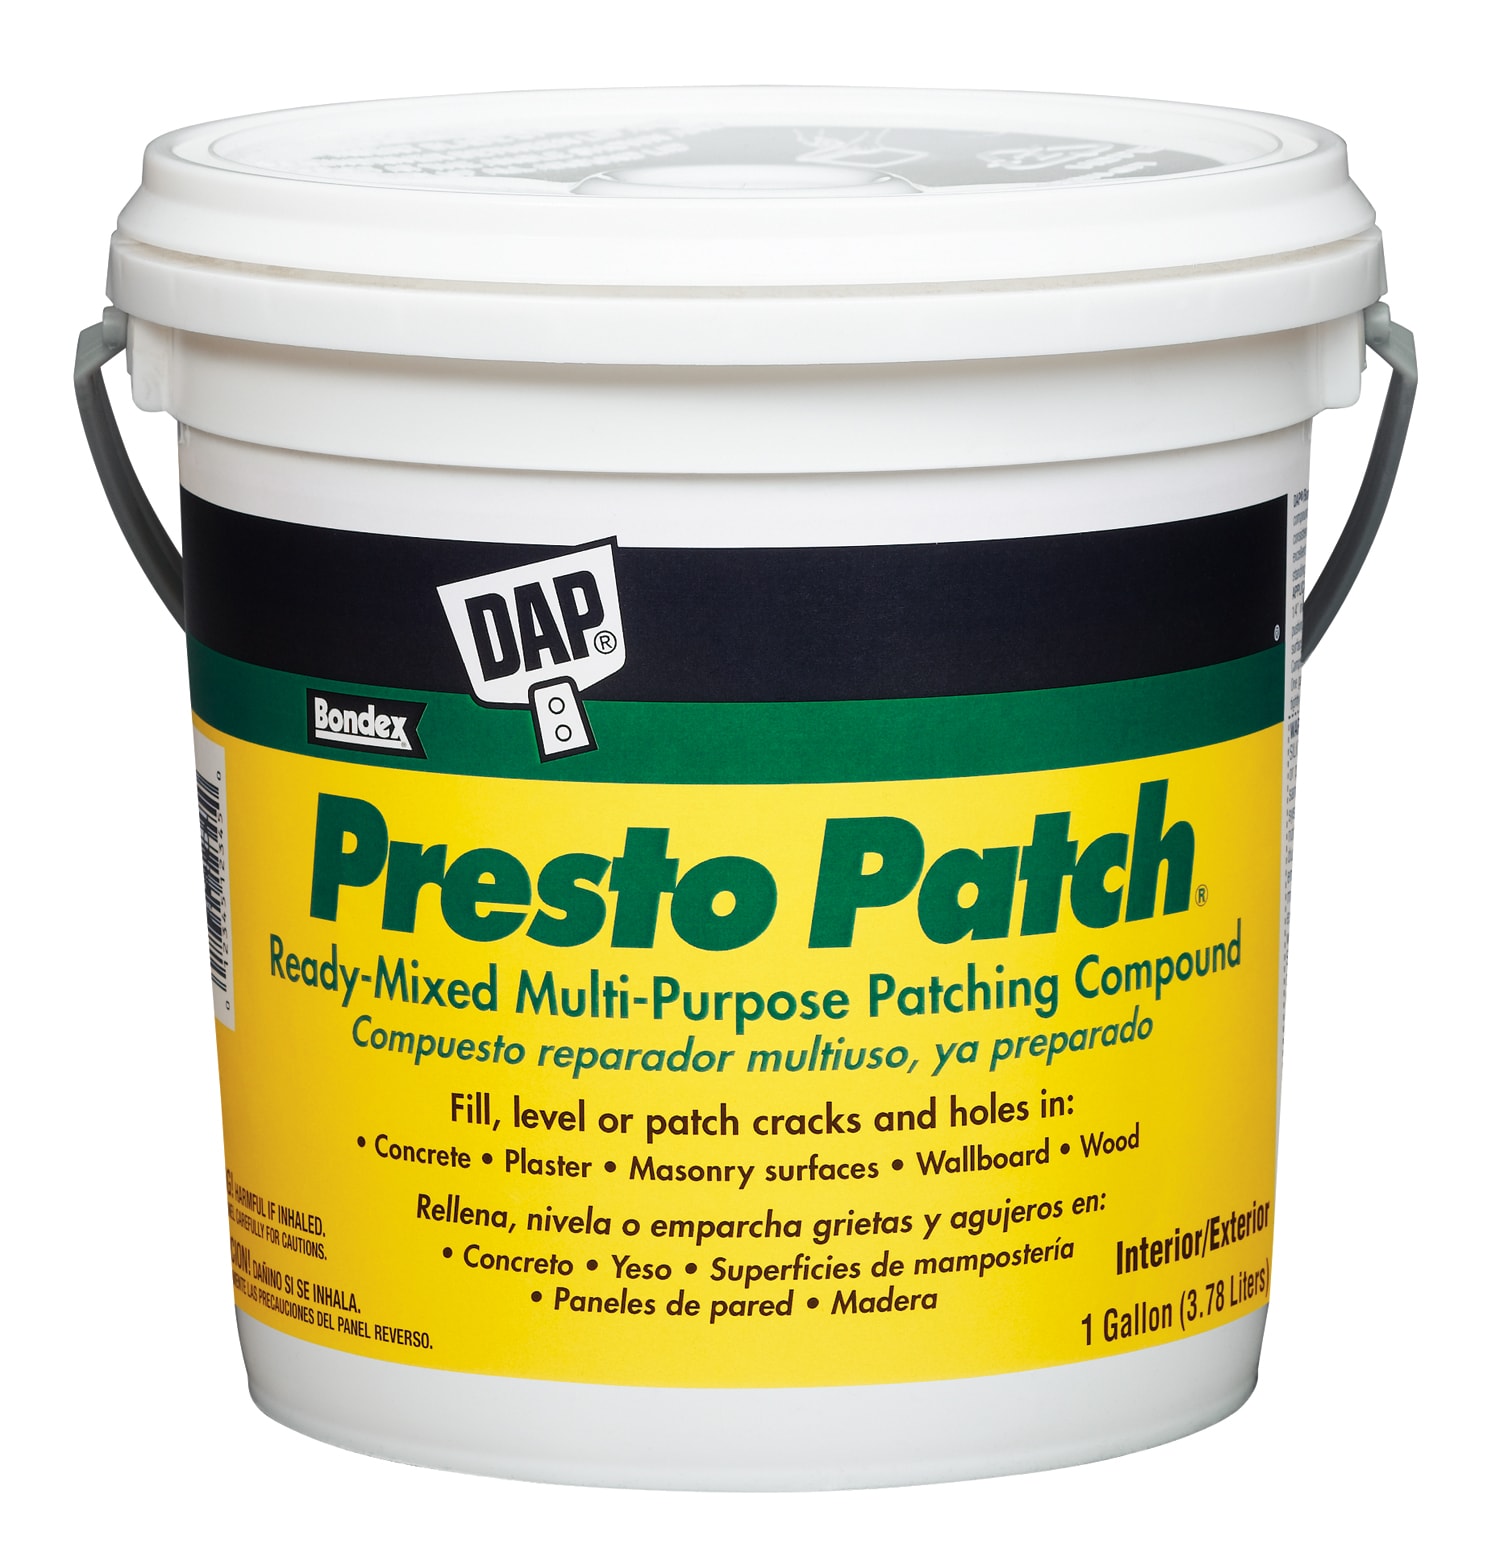 Zinsser Ready Patch 32-oz Color-changing Waterproof Interior/Exterior White  Spackling in the Patching & Spackling Compound department at